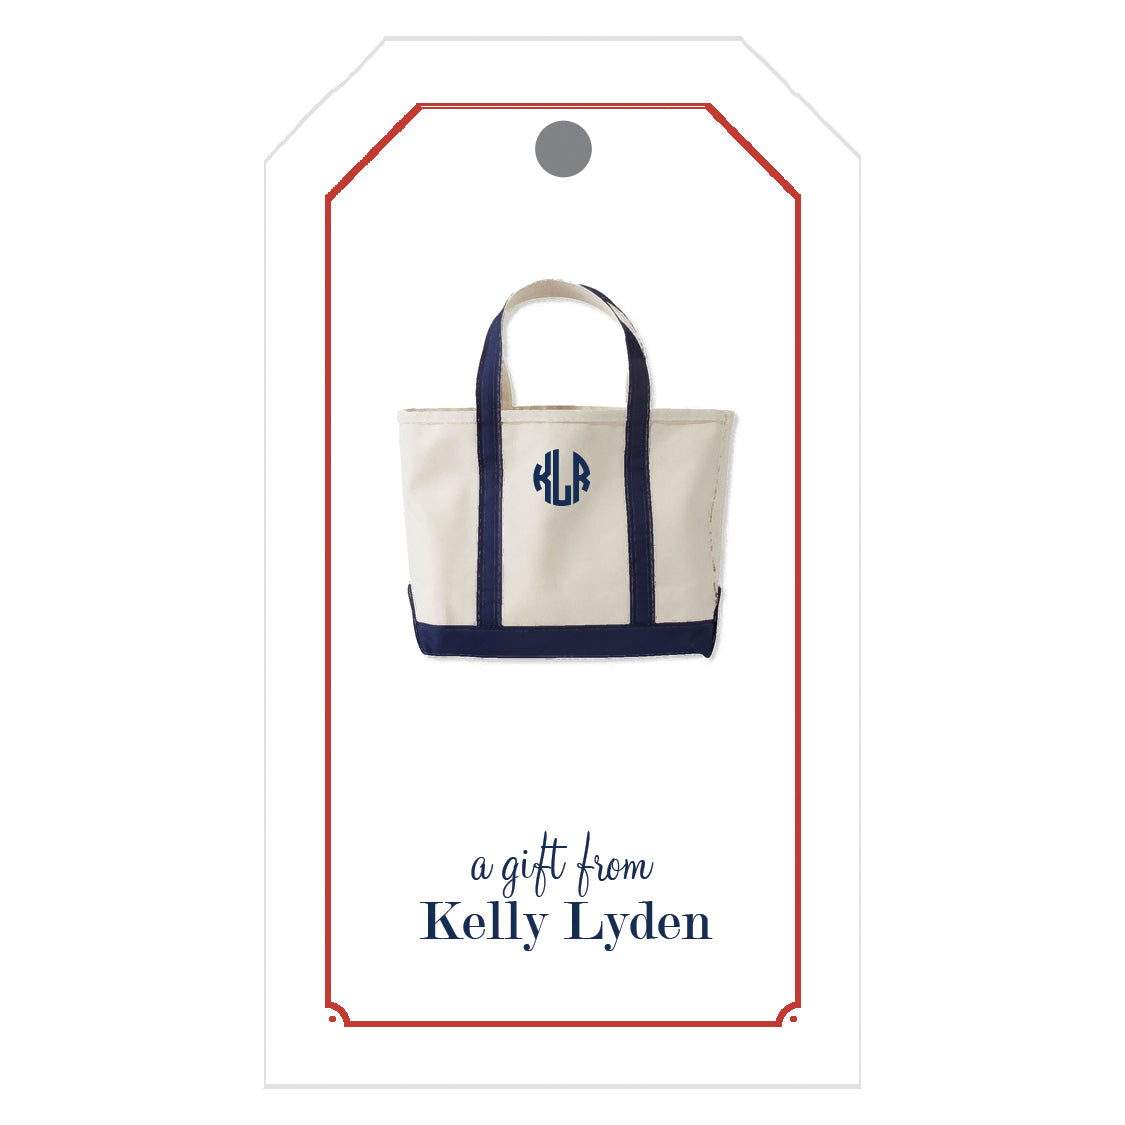 Personalized Boat Tote